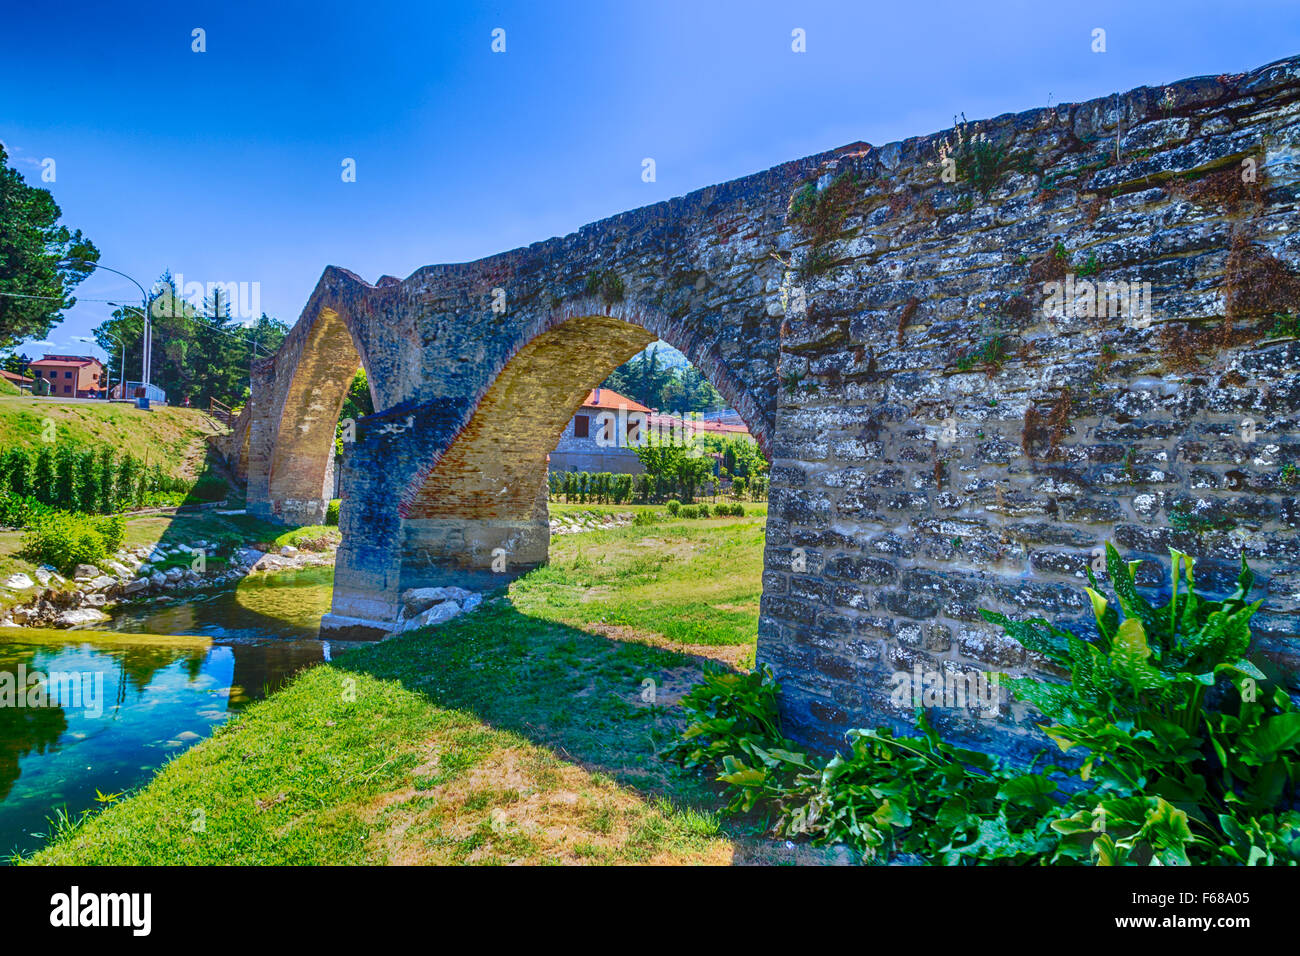 The XVIII century bridge in Modigliana in Italy is overlooking the quiet waters of the small creek with the medieval humpback structure of the three archs Stock Photo